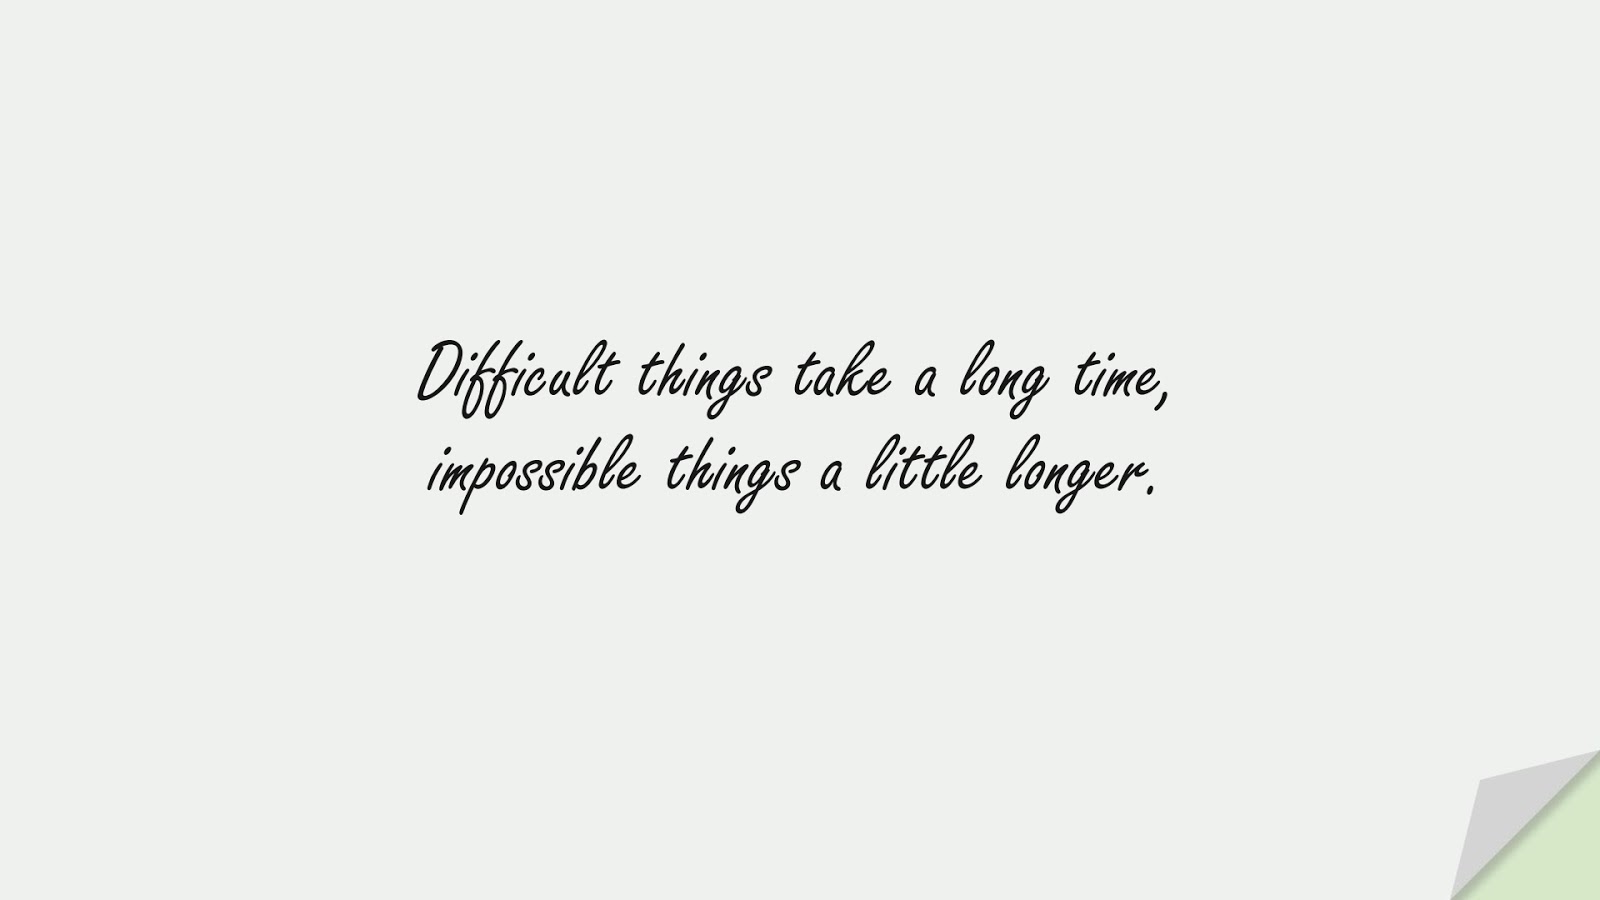 Difficult things take a long time, impossible things a little longer.FALSE